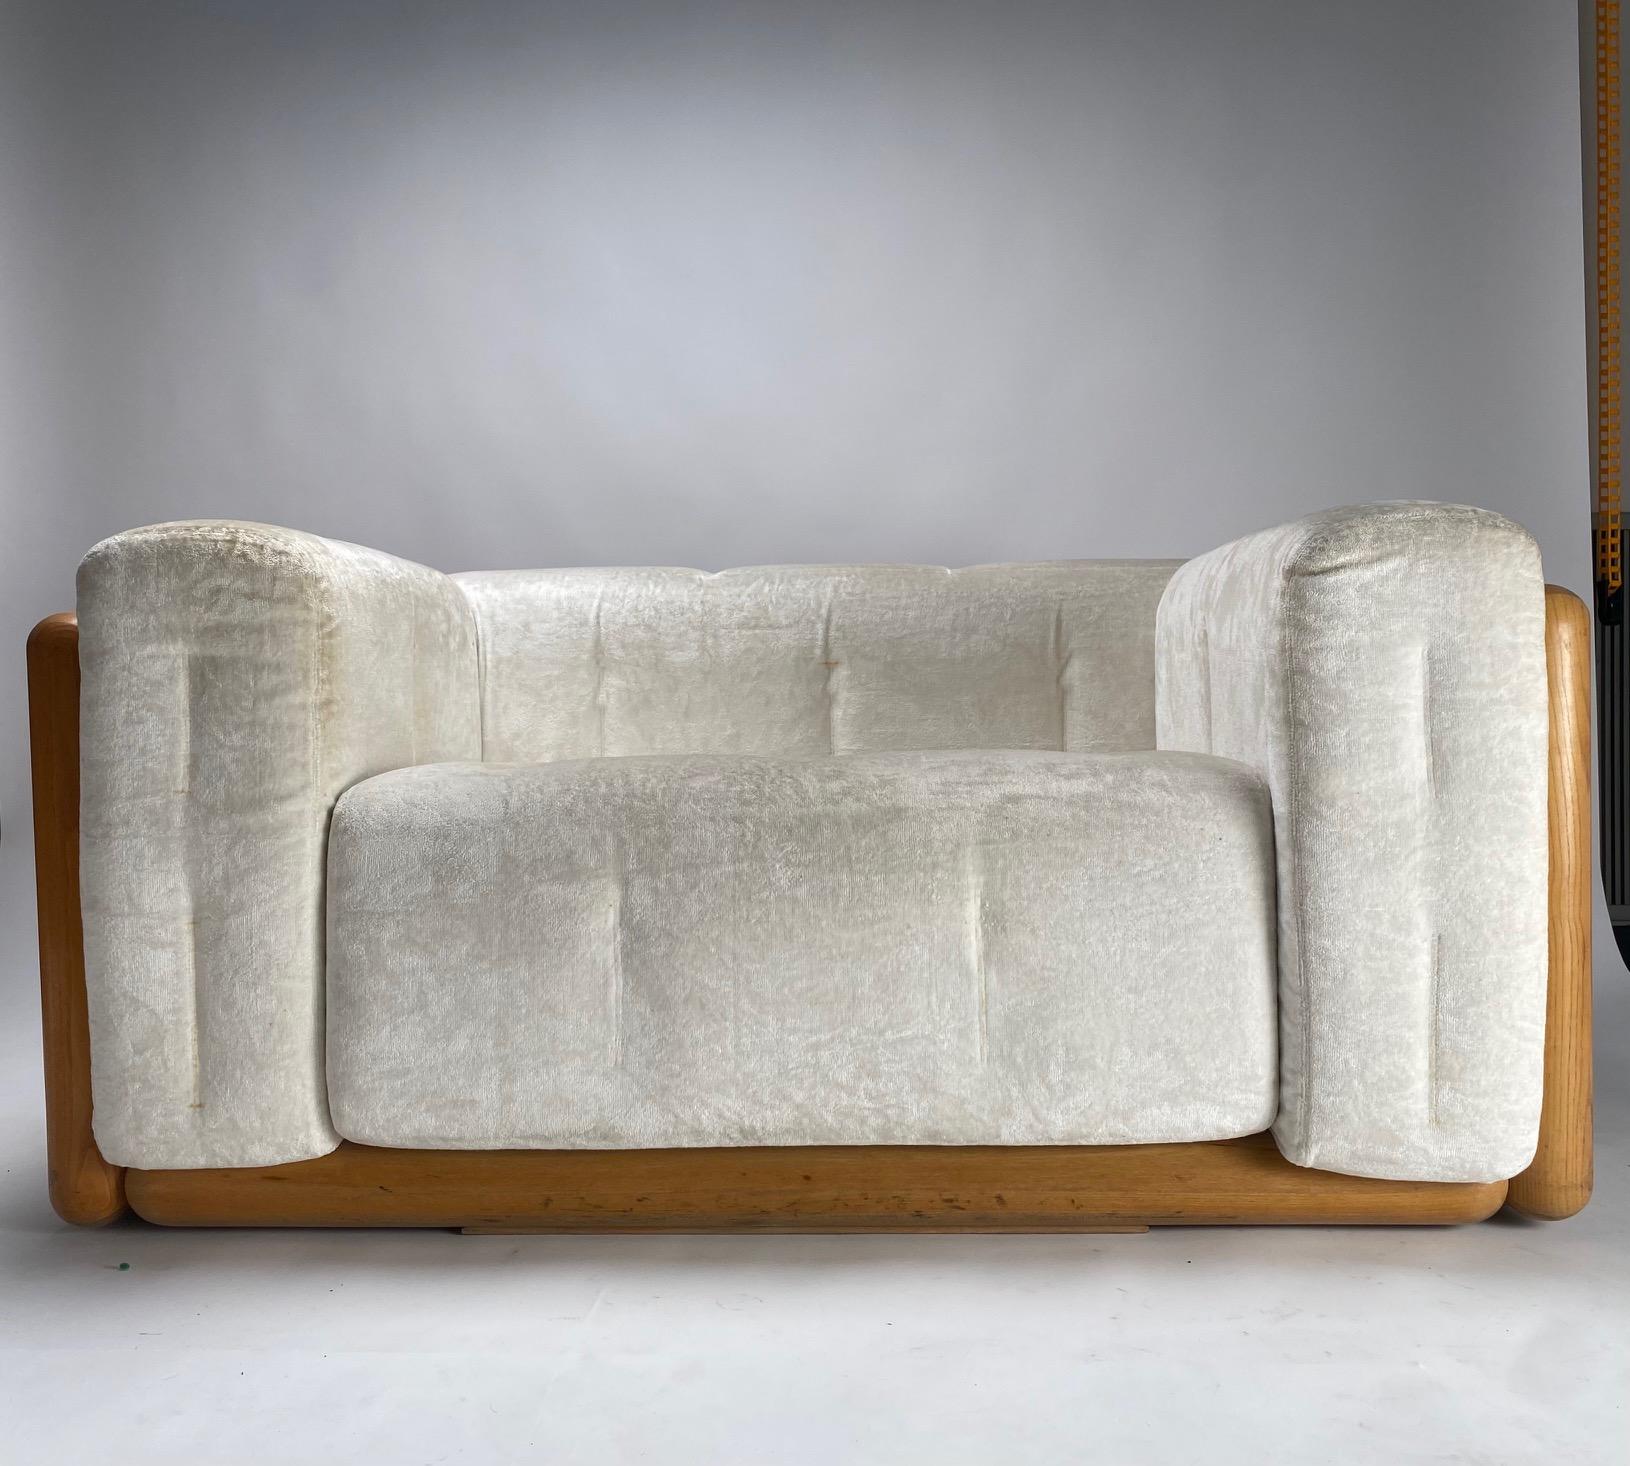 Carlo Scarpa, Cornaro 140 armchair in ash wood, made for Gavina, Italy, 1973

This is one of the rarest and most fascinating versions of the famous sofa created by Carlo Scarpa, which due to its generous dimensions and comfort can also be used as a